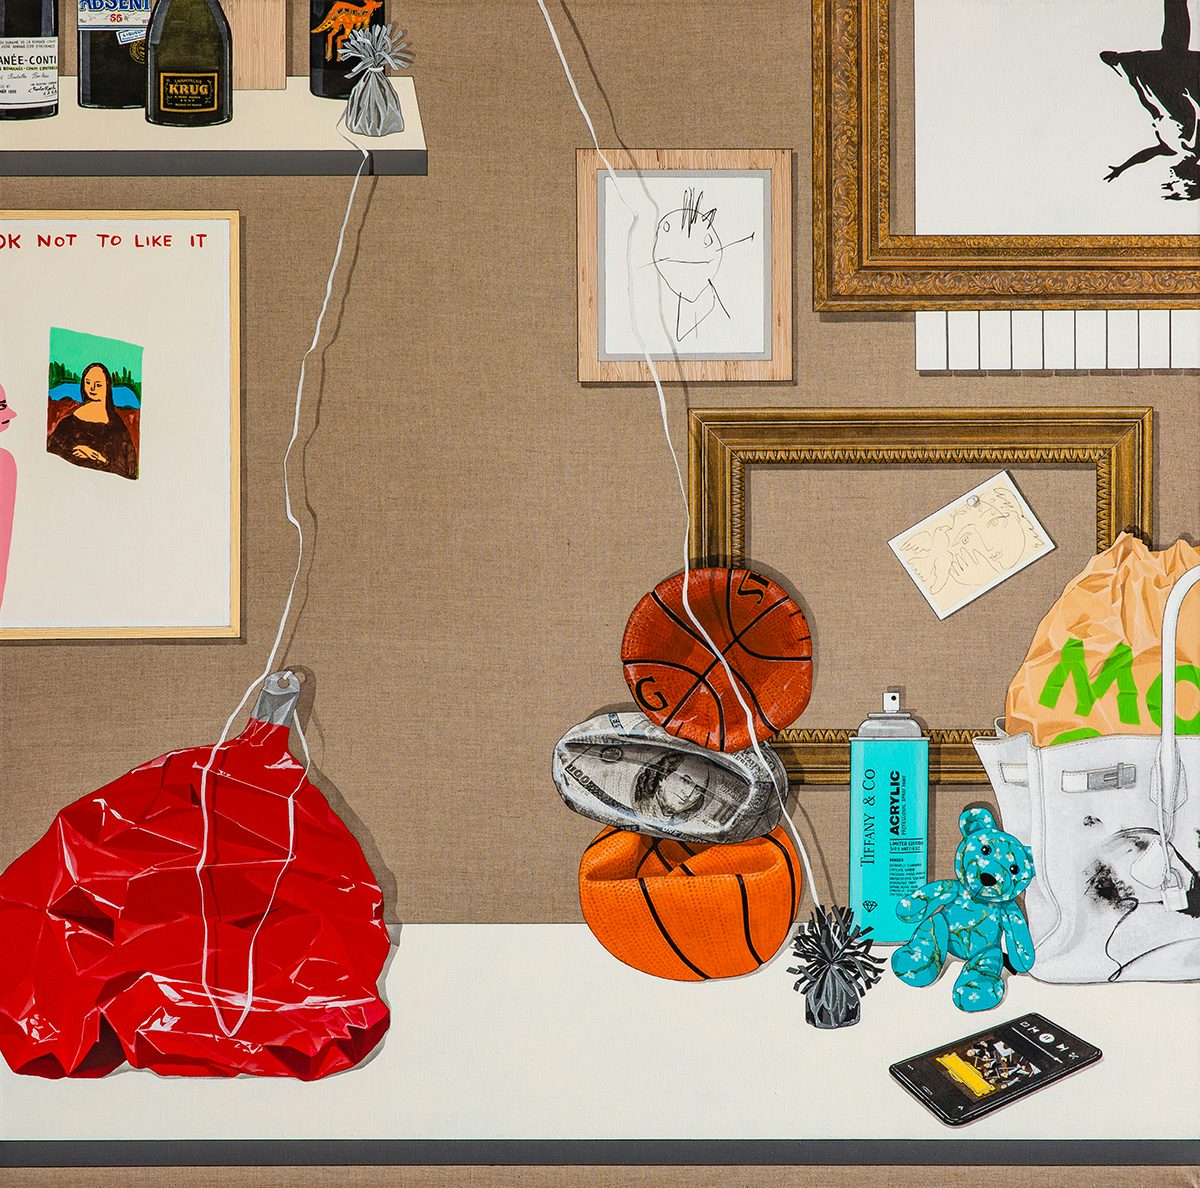 Painting by Sooyoung Chung showing a deflated red balloon, an upside down rendition of Banksy's balloon girl artwork, and deflated basketballs